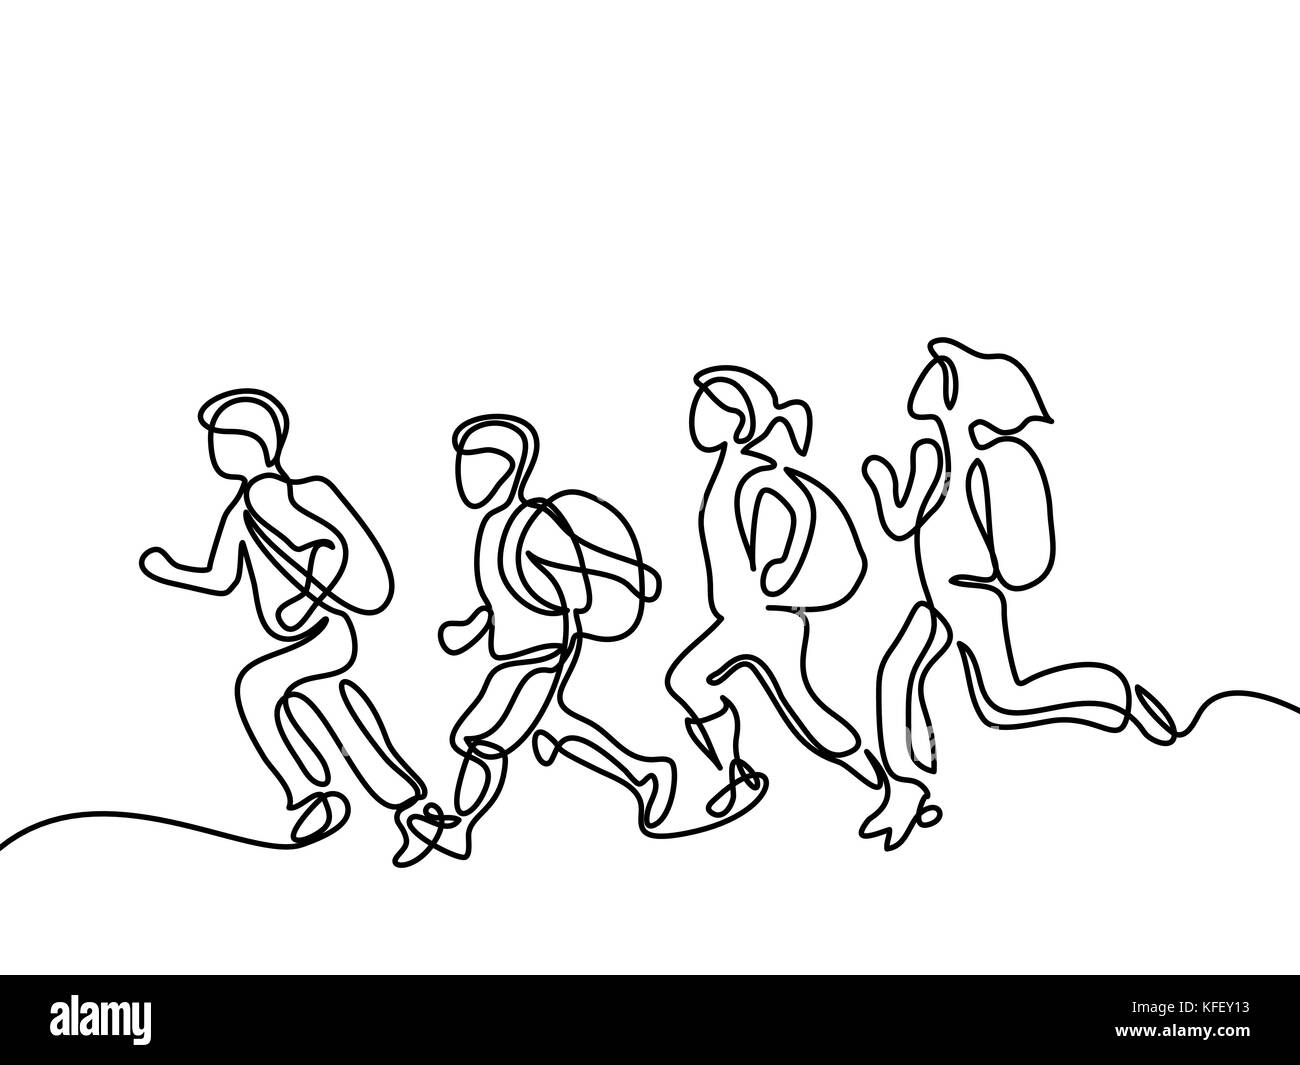 Kids running back to school with bags. Continuous line drawing. Vector illustration on white background Stock Vector